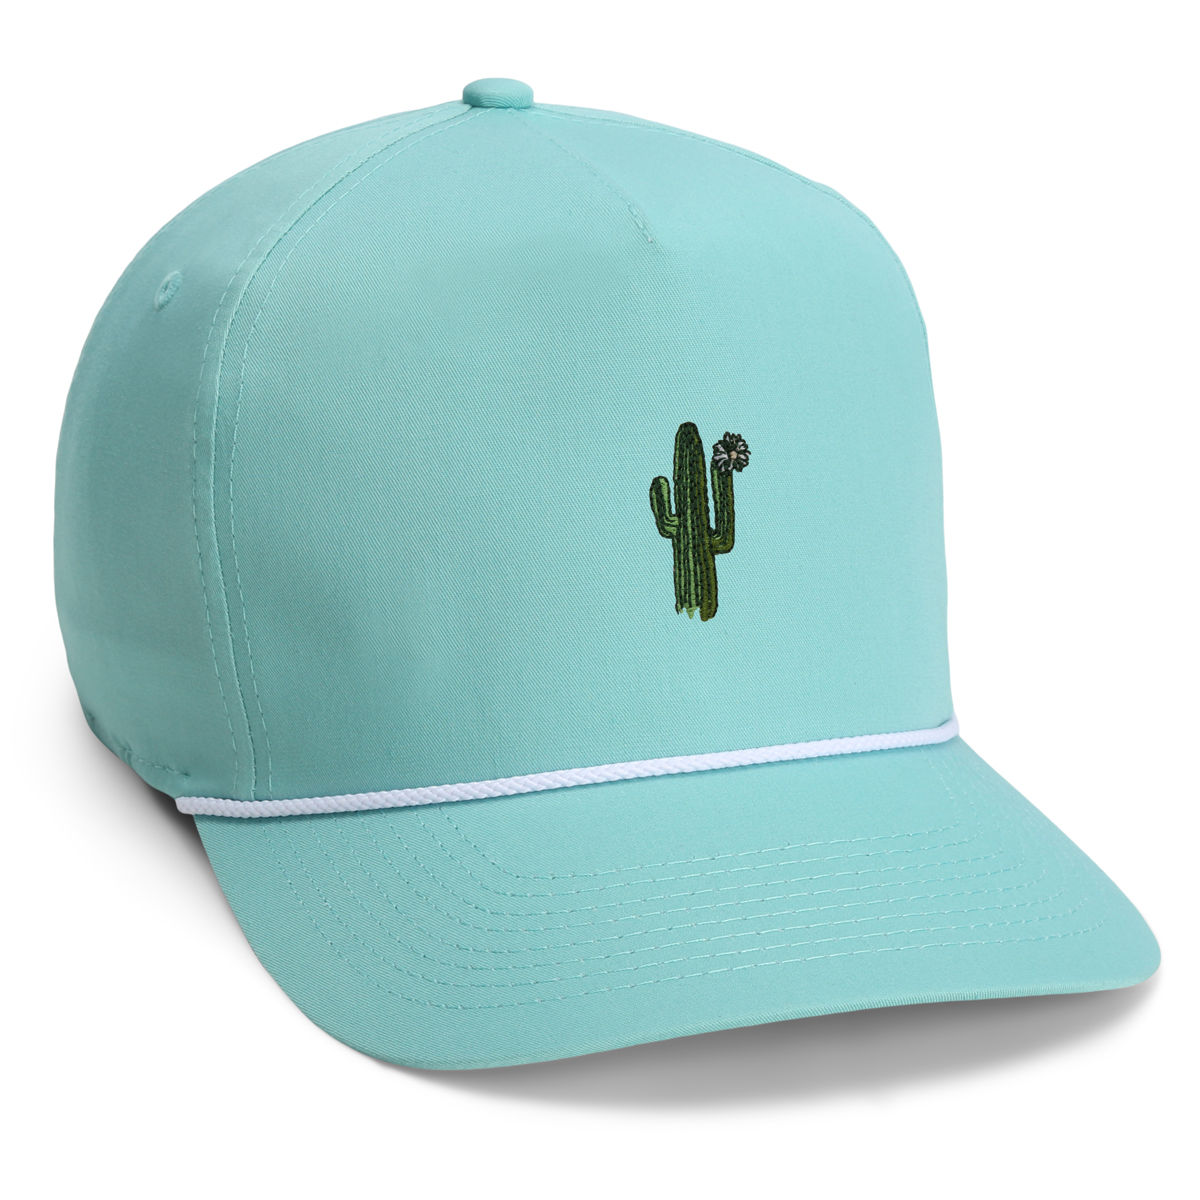 Find Imperial Golf Hats at the 2022 WM Phoenix Open